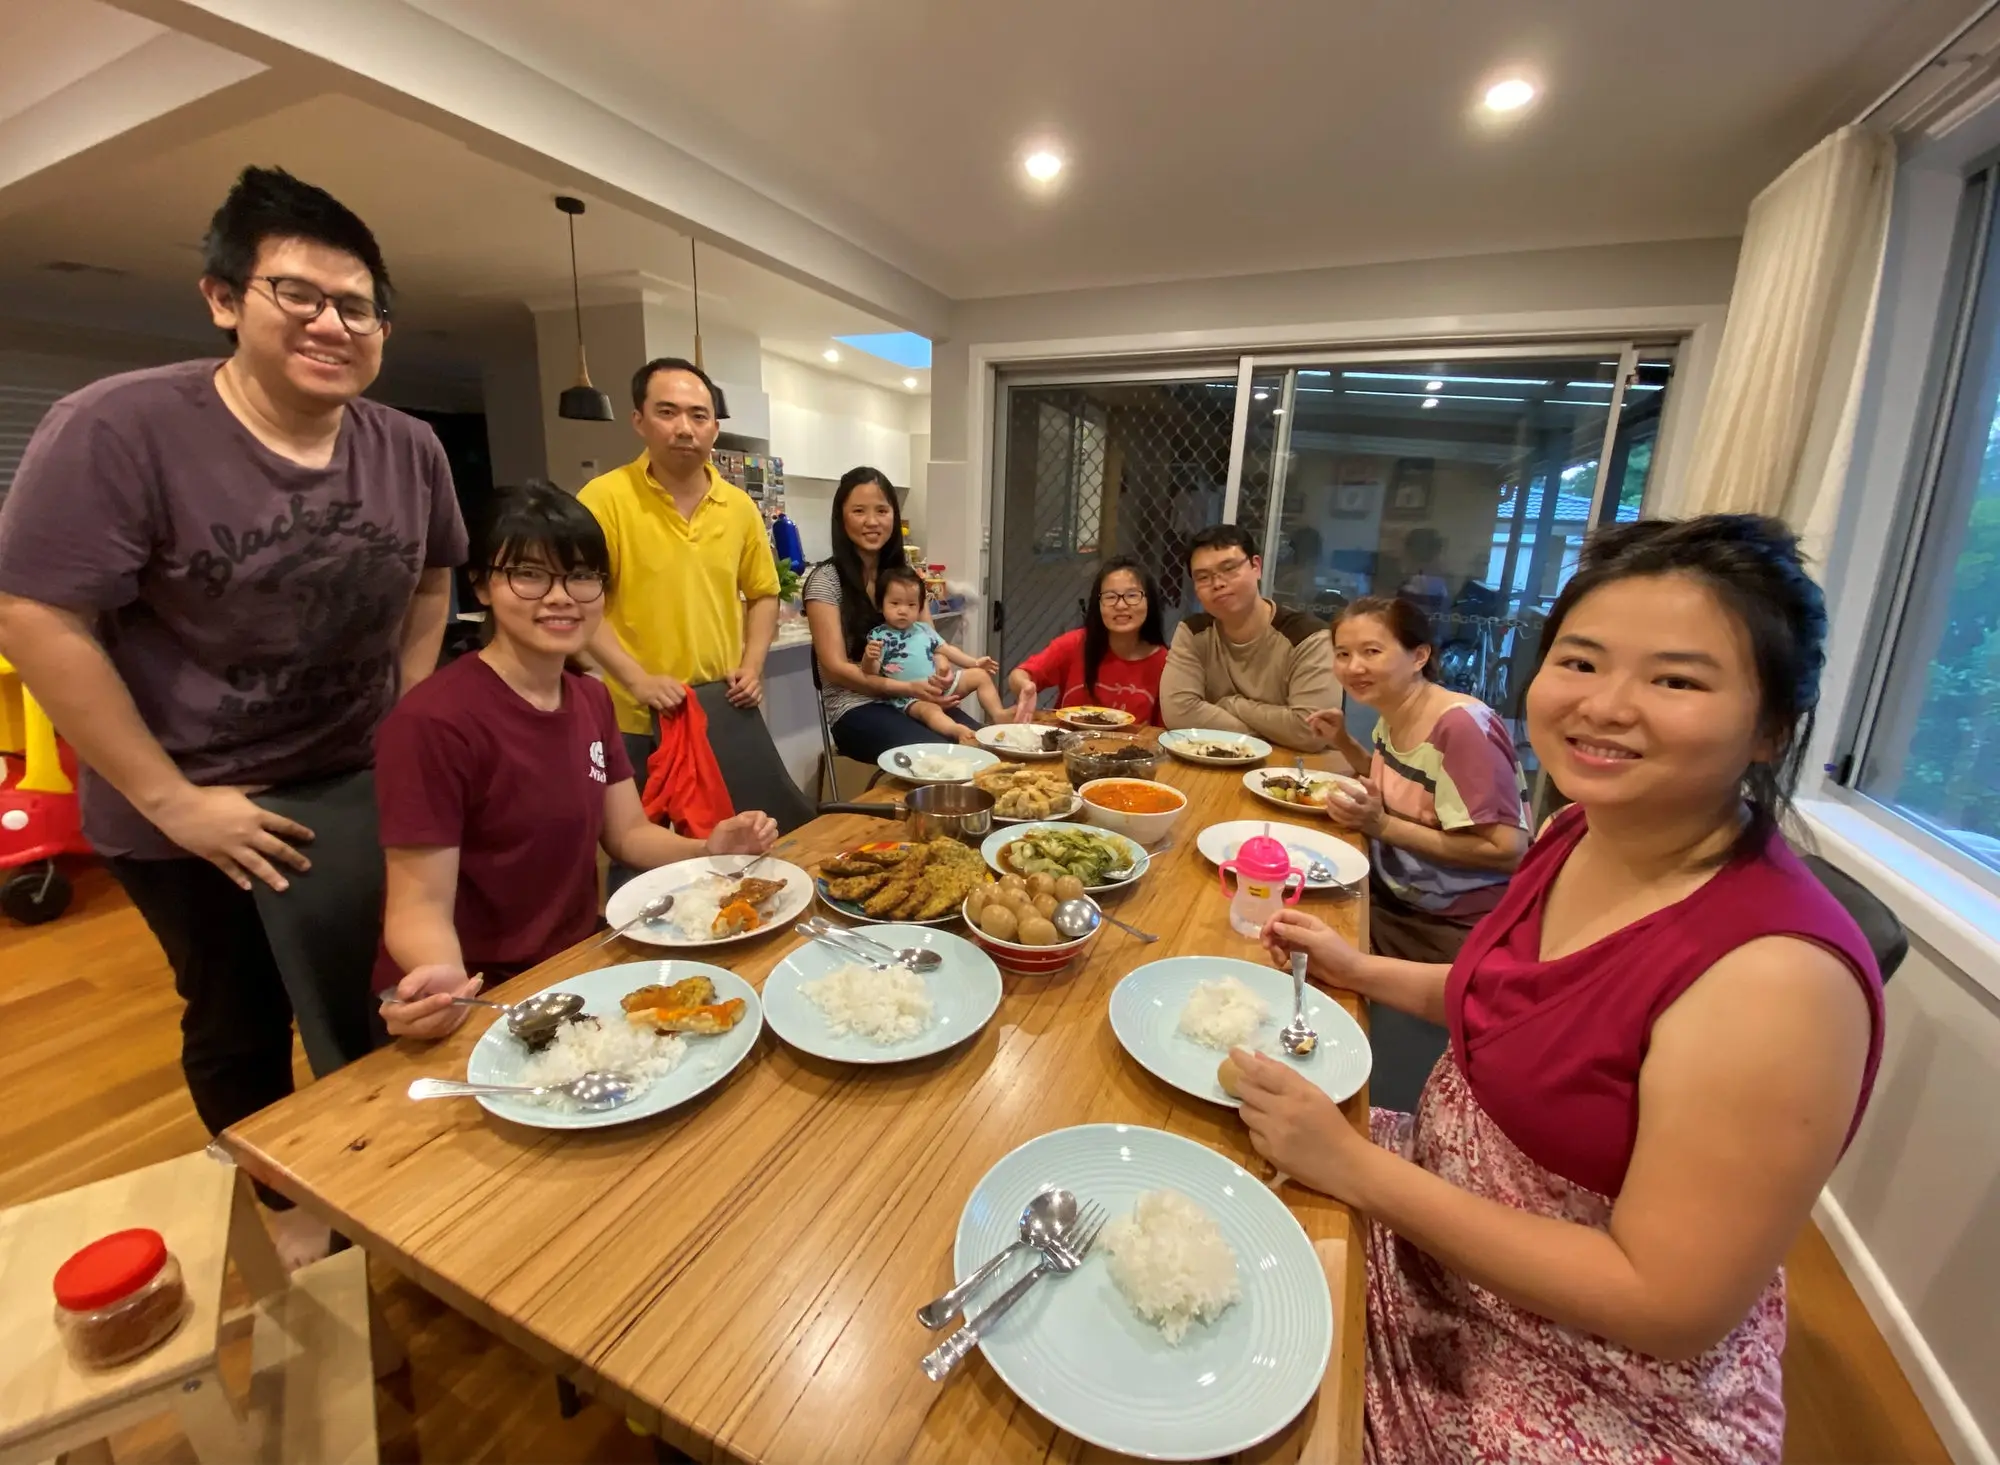 Franklin celebrating Lunar New Year with his family.